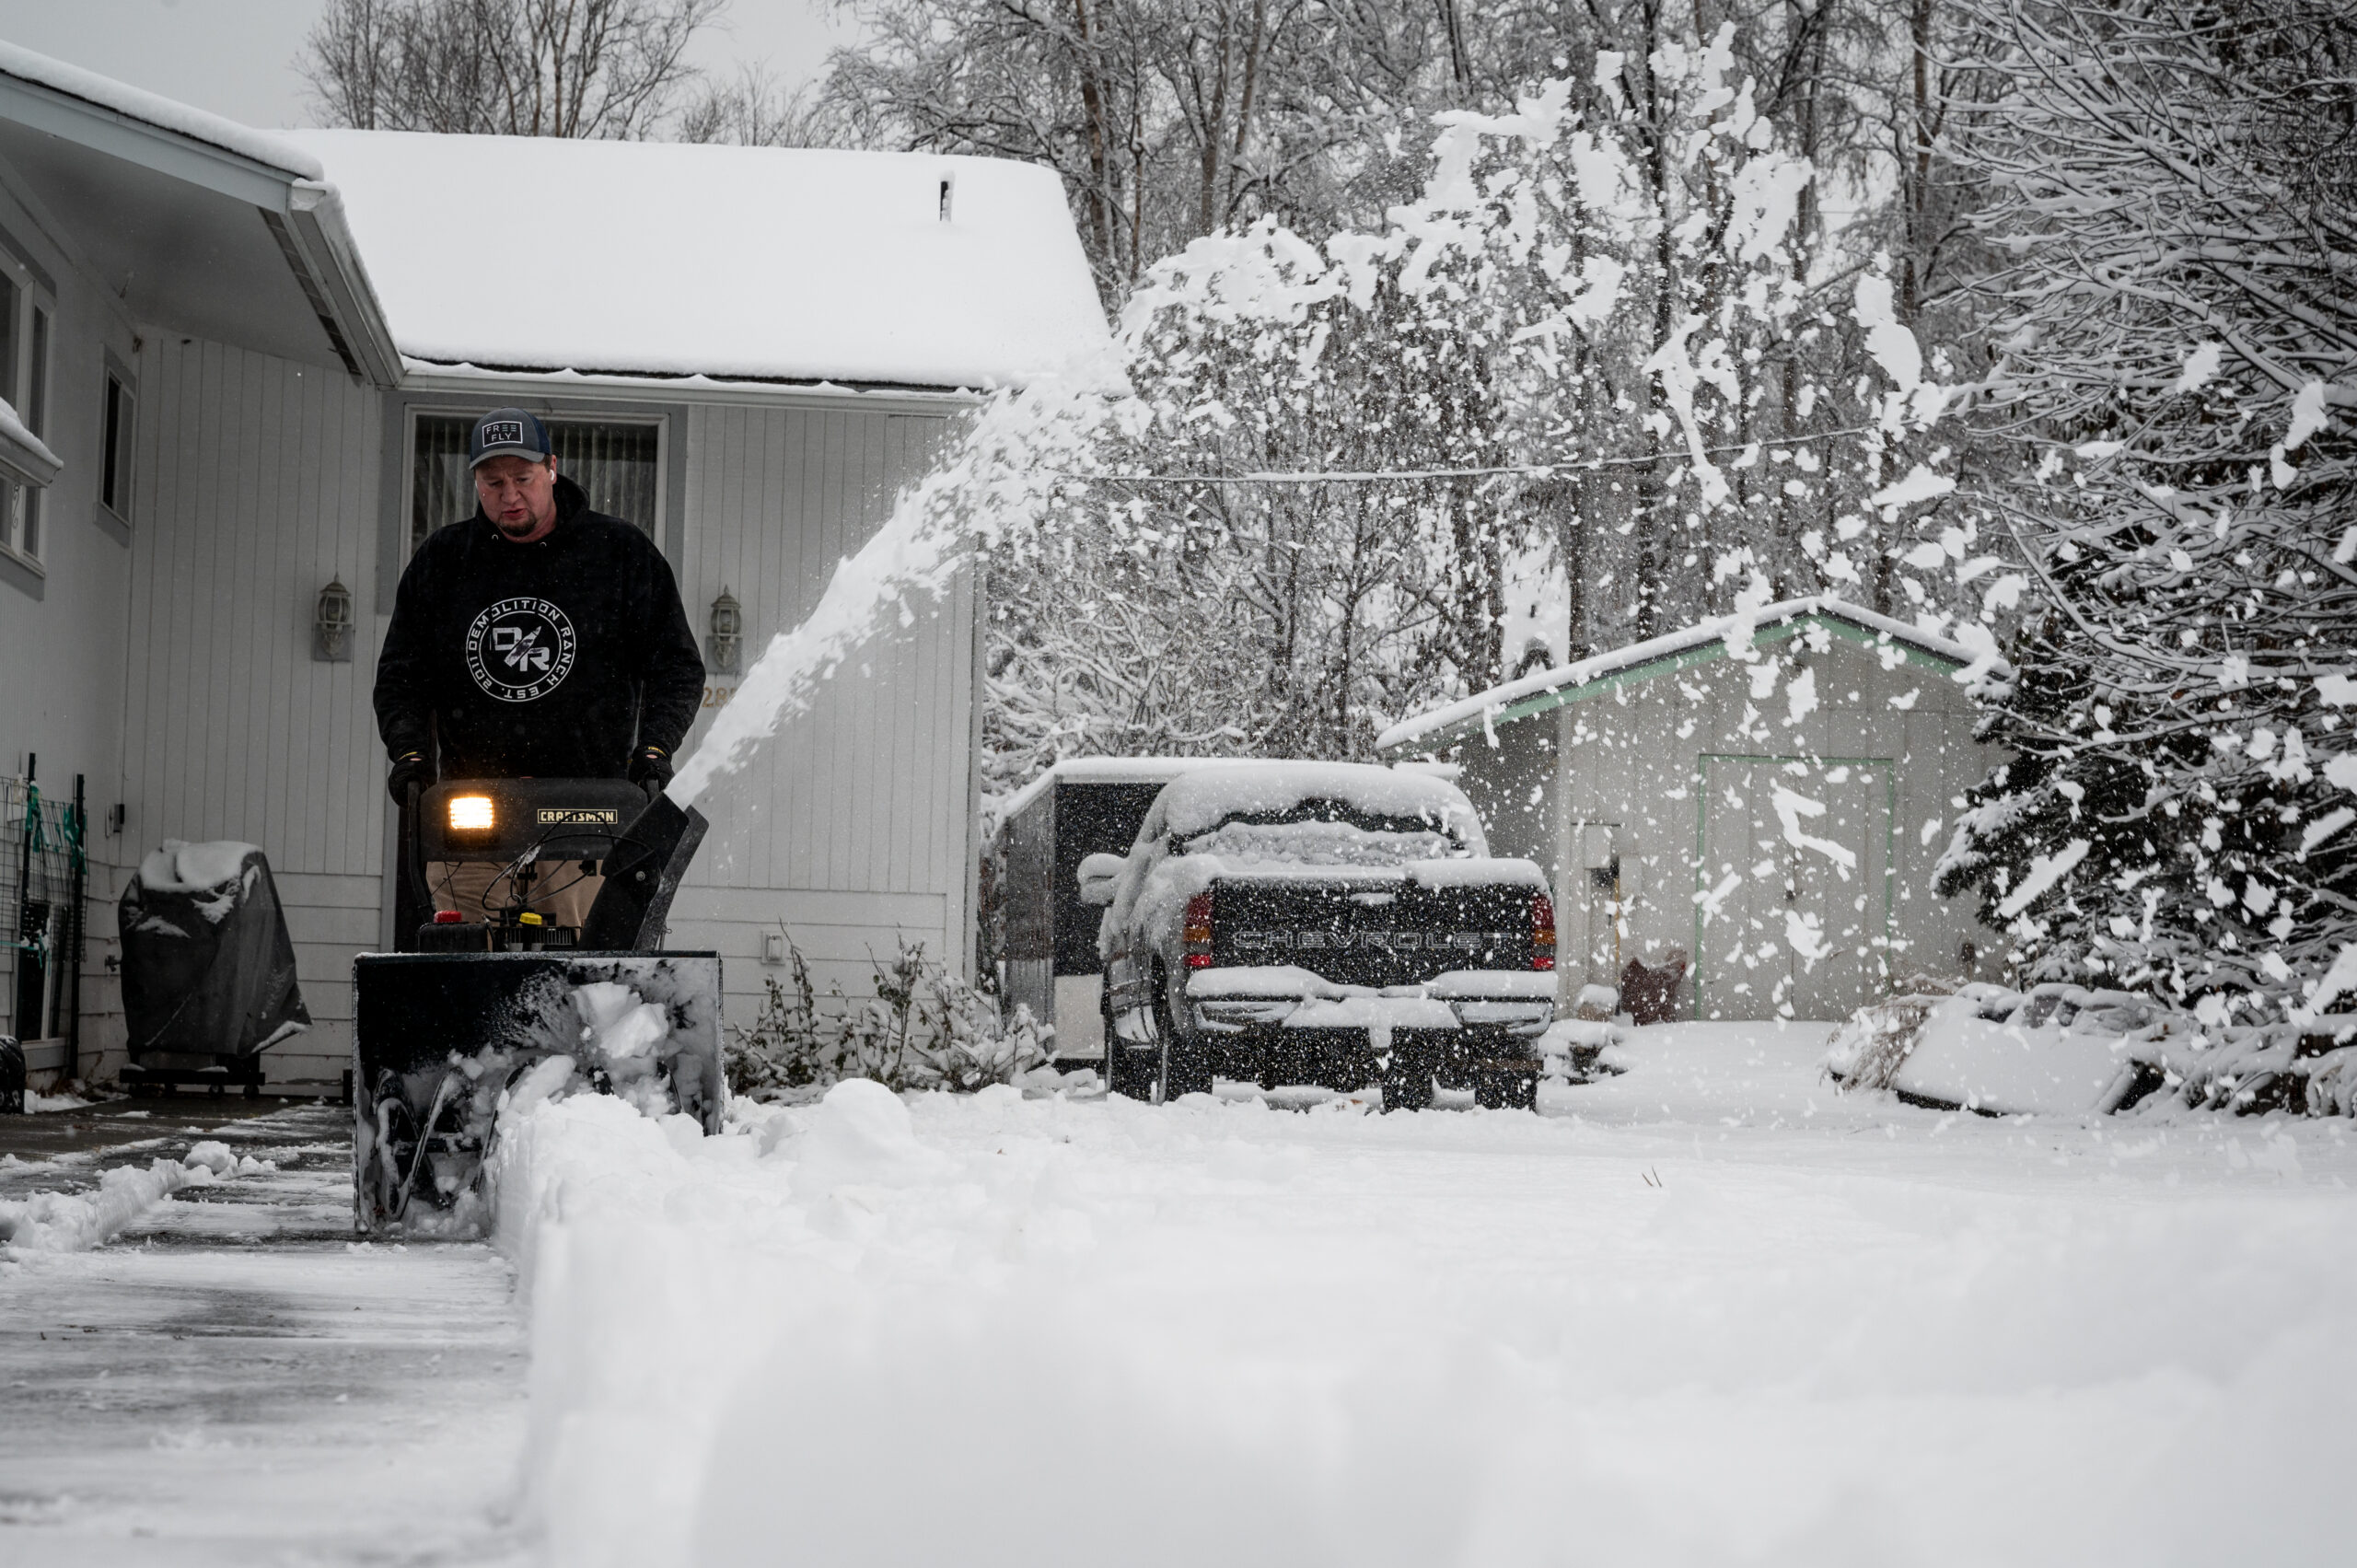 A man in a black hoodie uses a snow blower on his driveway.